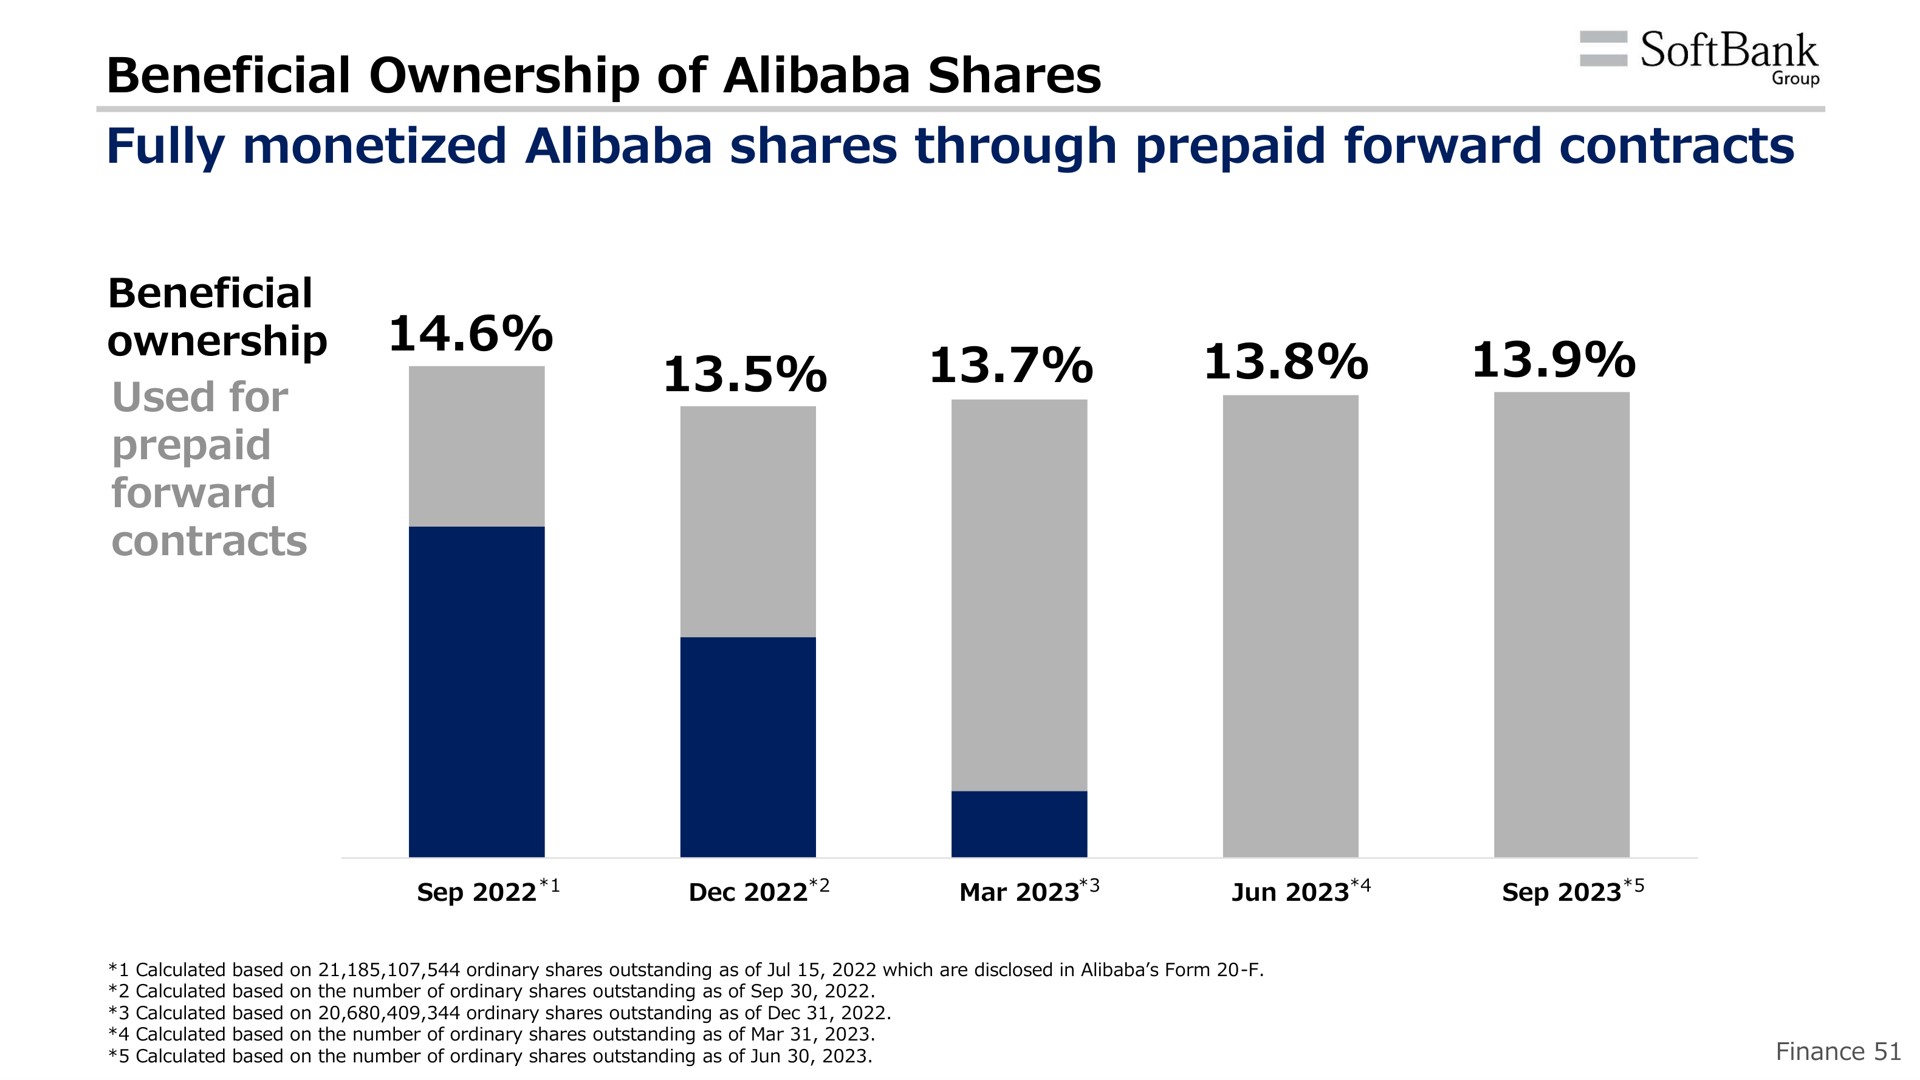 beneficial ownership of shares fully monetized shares through prepaid forward contracts | SoftBank